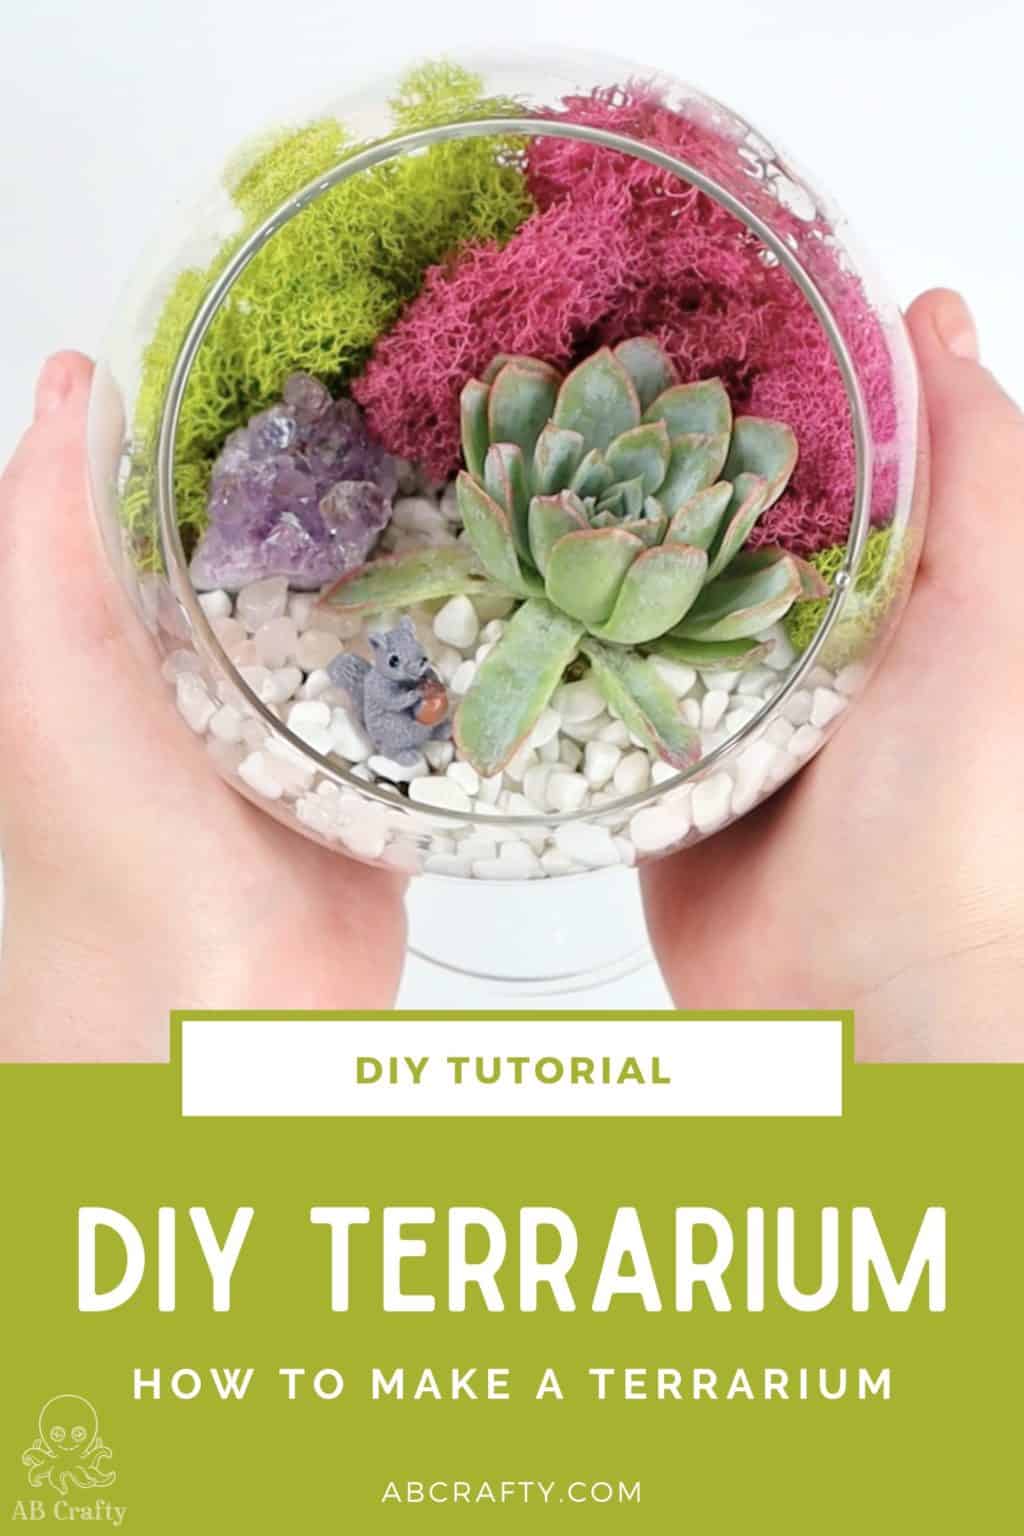 holding the finished succulent terrarium with the title "diy terrarium, how to make a terrarium, abcrafty.com"